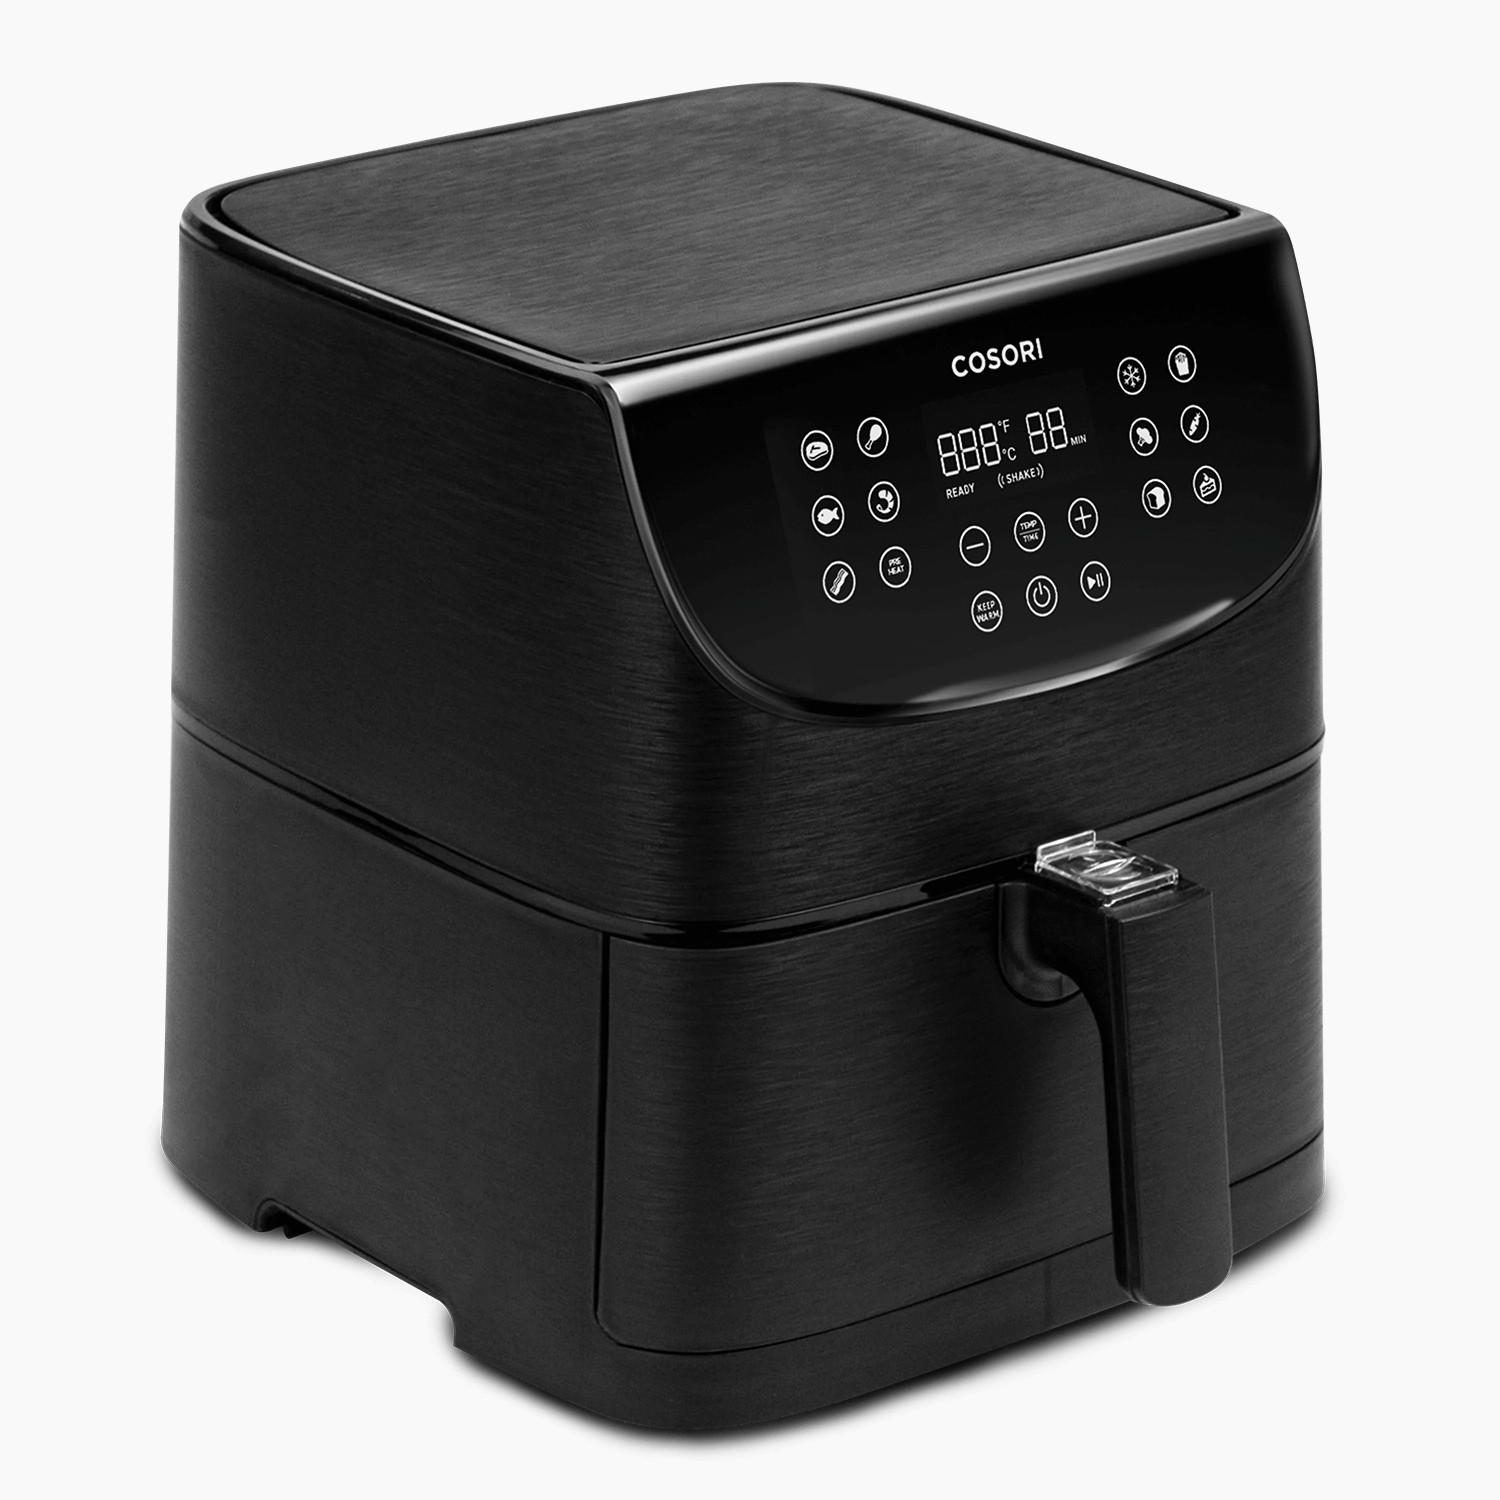 HGG22 hometech cosori air fryer The Verge’s 2022 home tech holiday gift guide